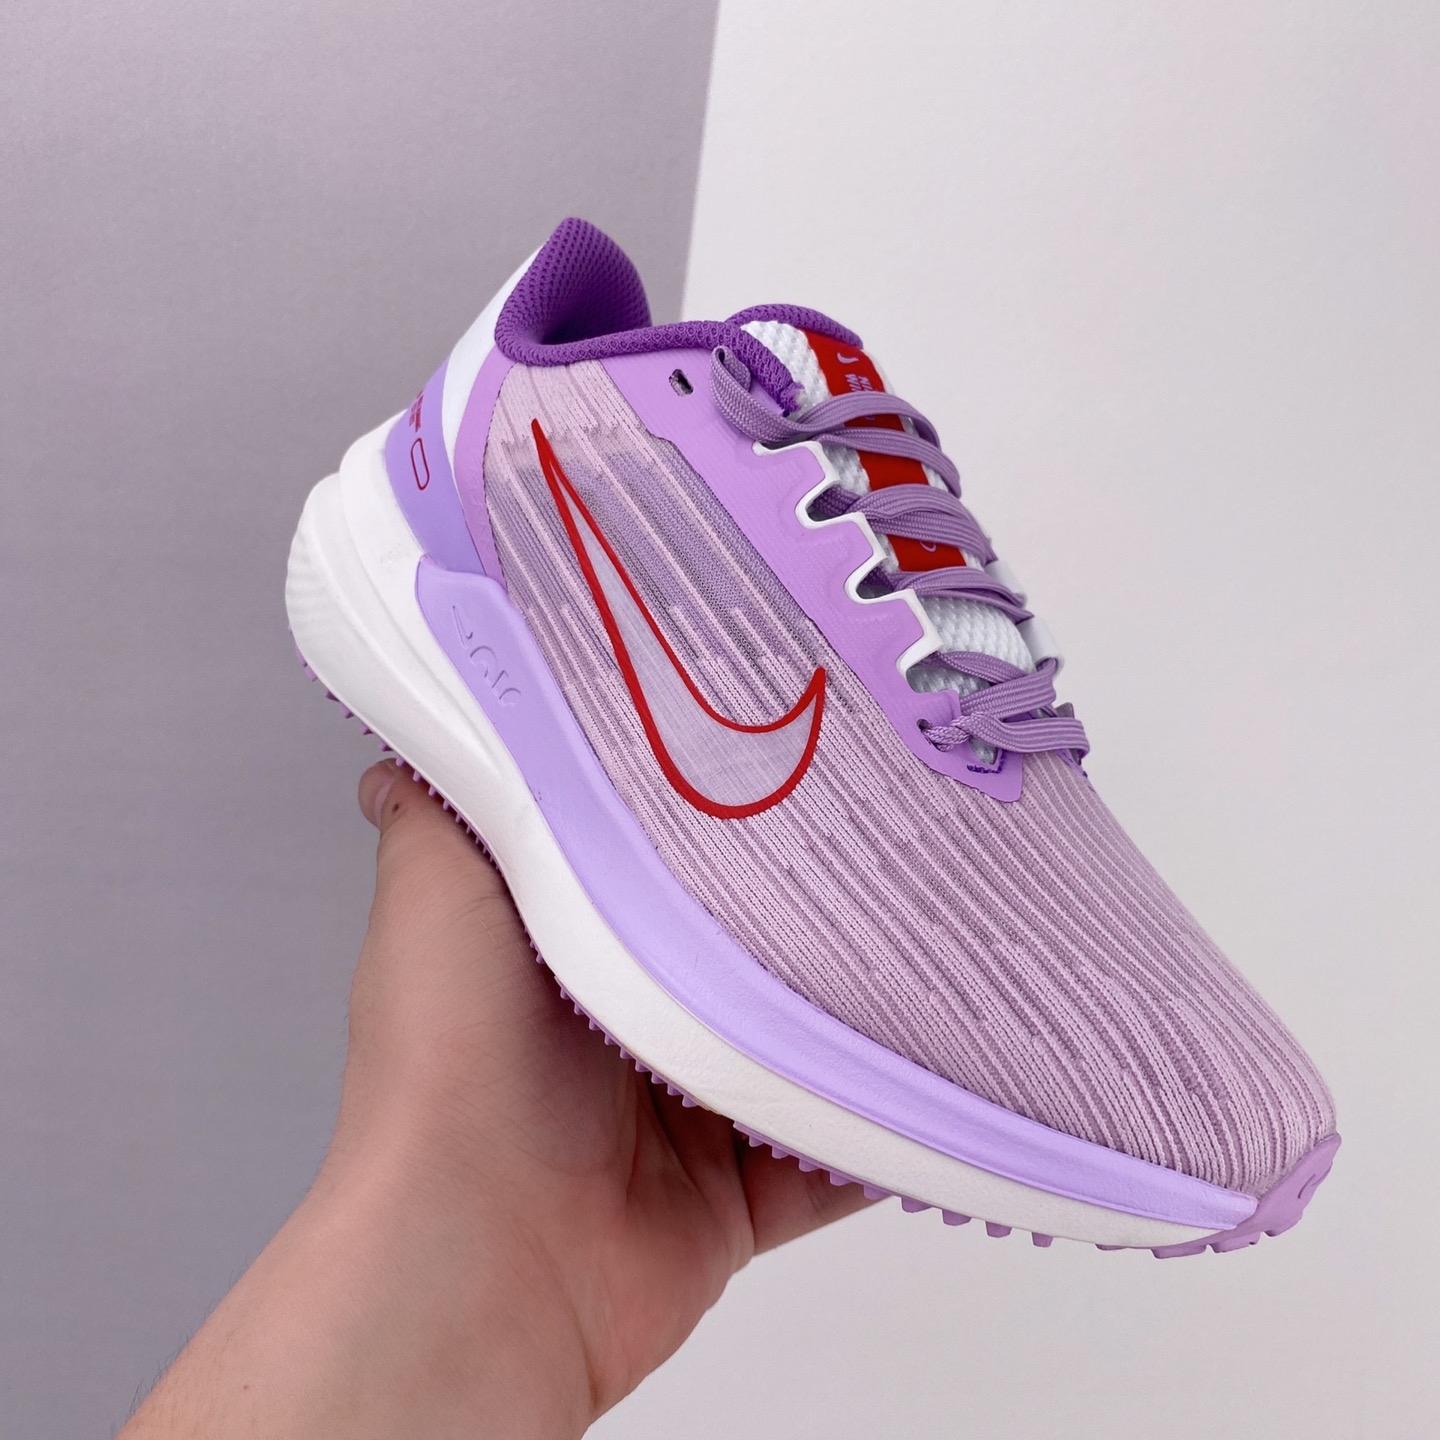 Nike Air Winflo 9 'Barely Grape Lt Crimson Doll' DD8686-501 - Stylish and Comfortable Running Shoes